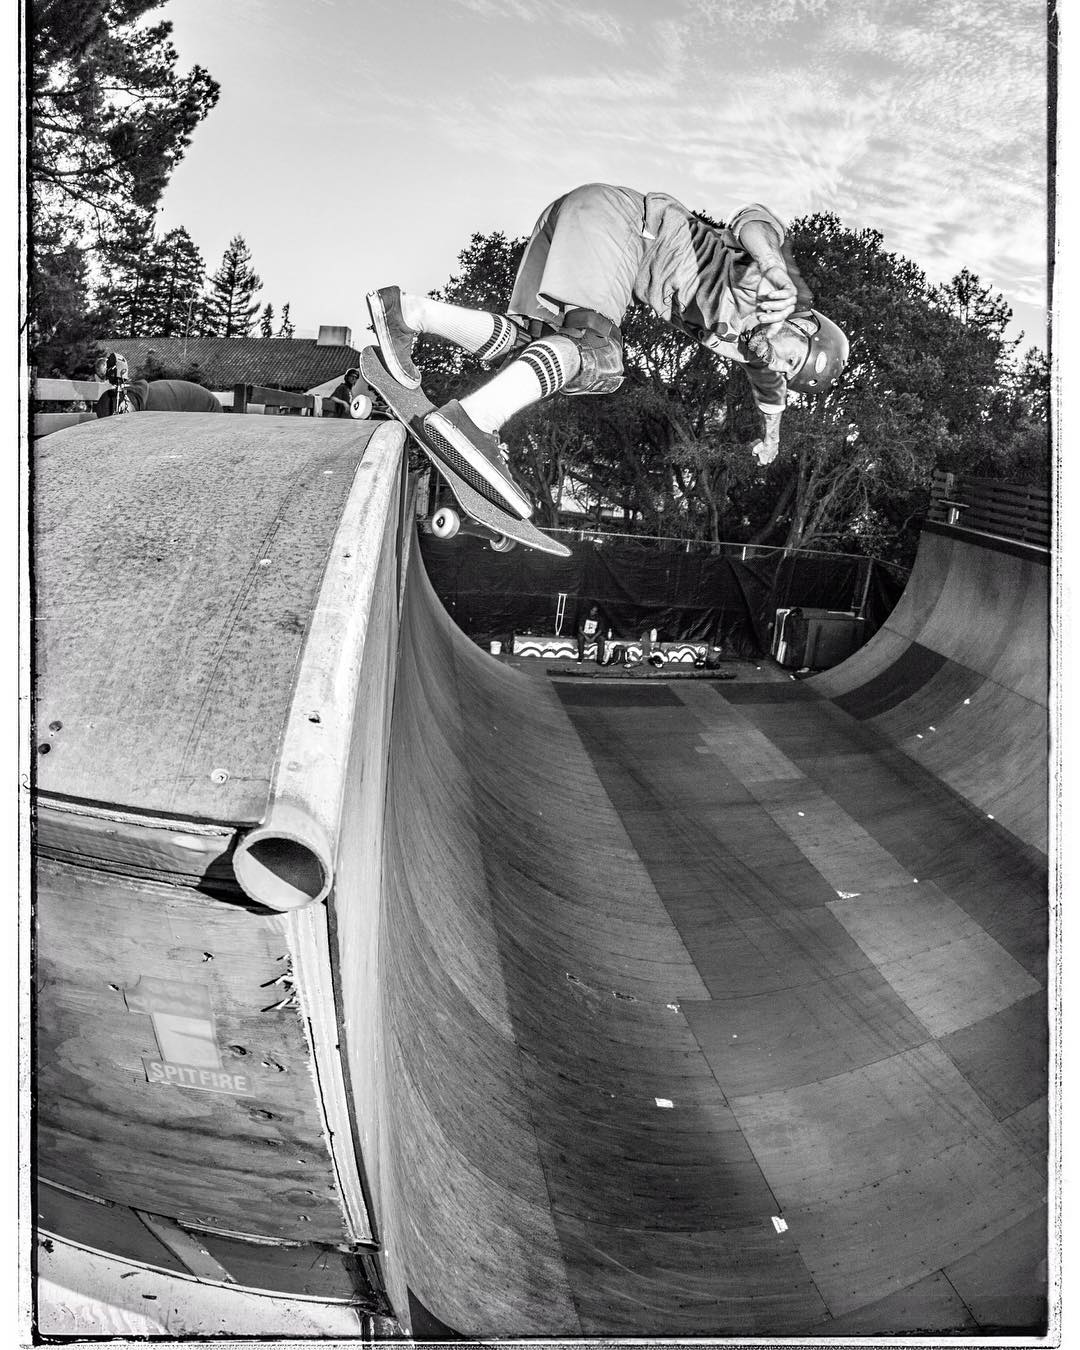 Max Schaaf, Monty grind up the extention at Berkeley Vert from his Bailgun Mag interview a little while ago. @4q69.com